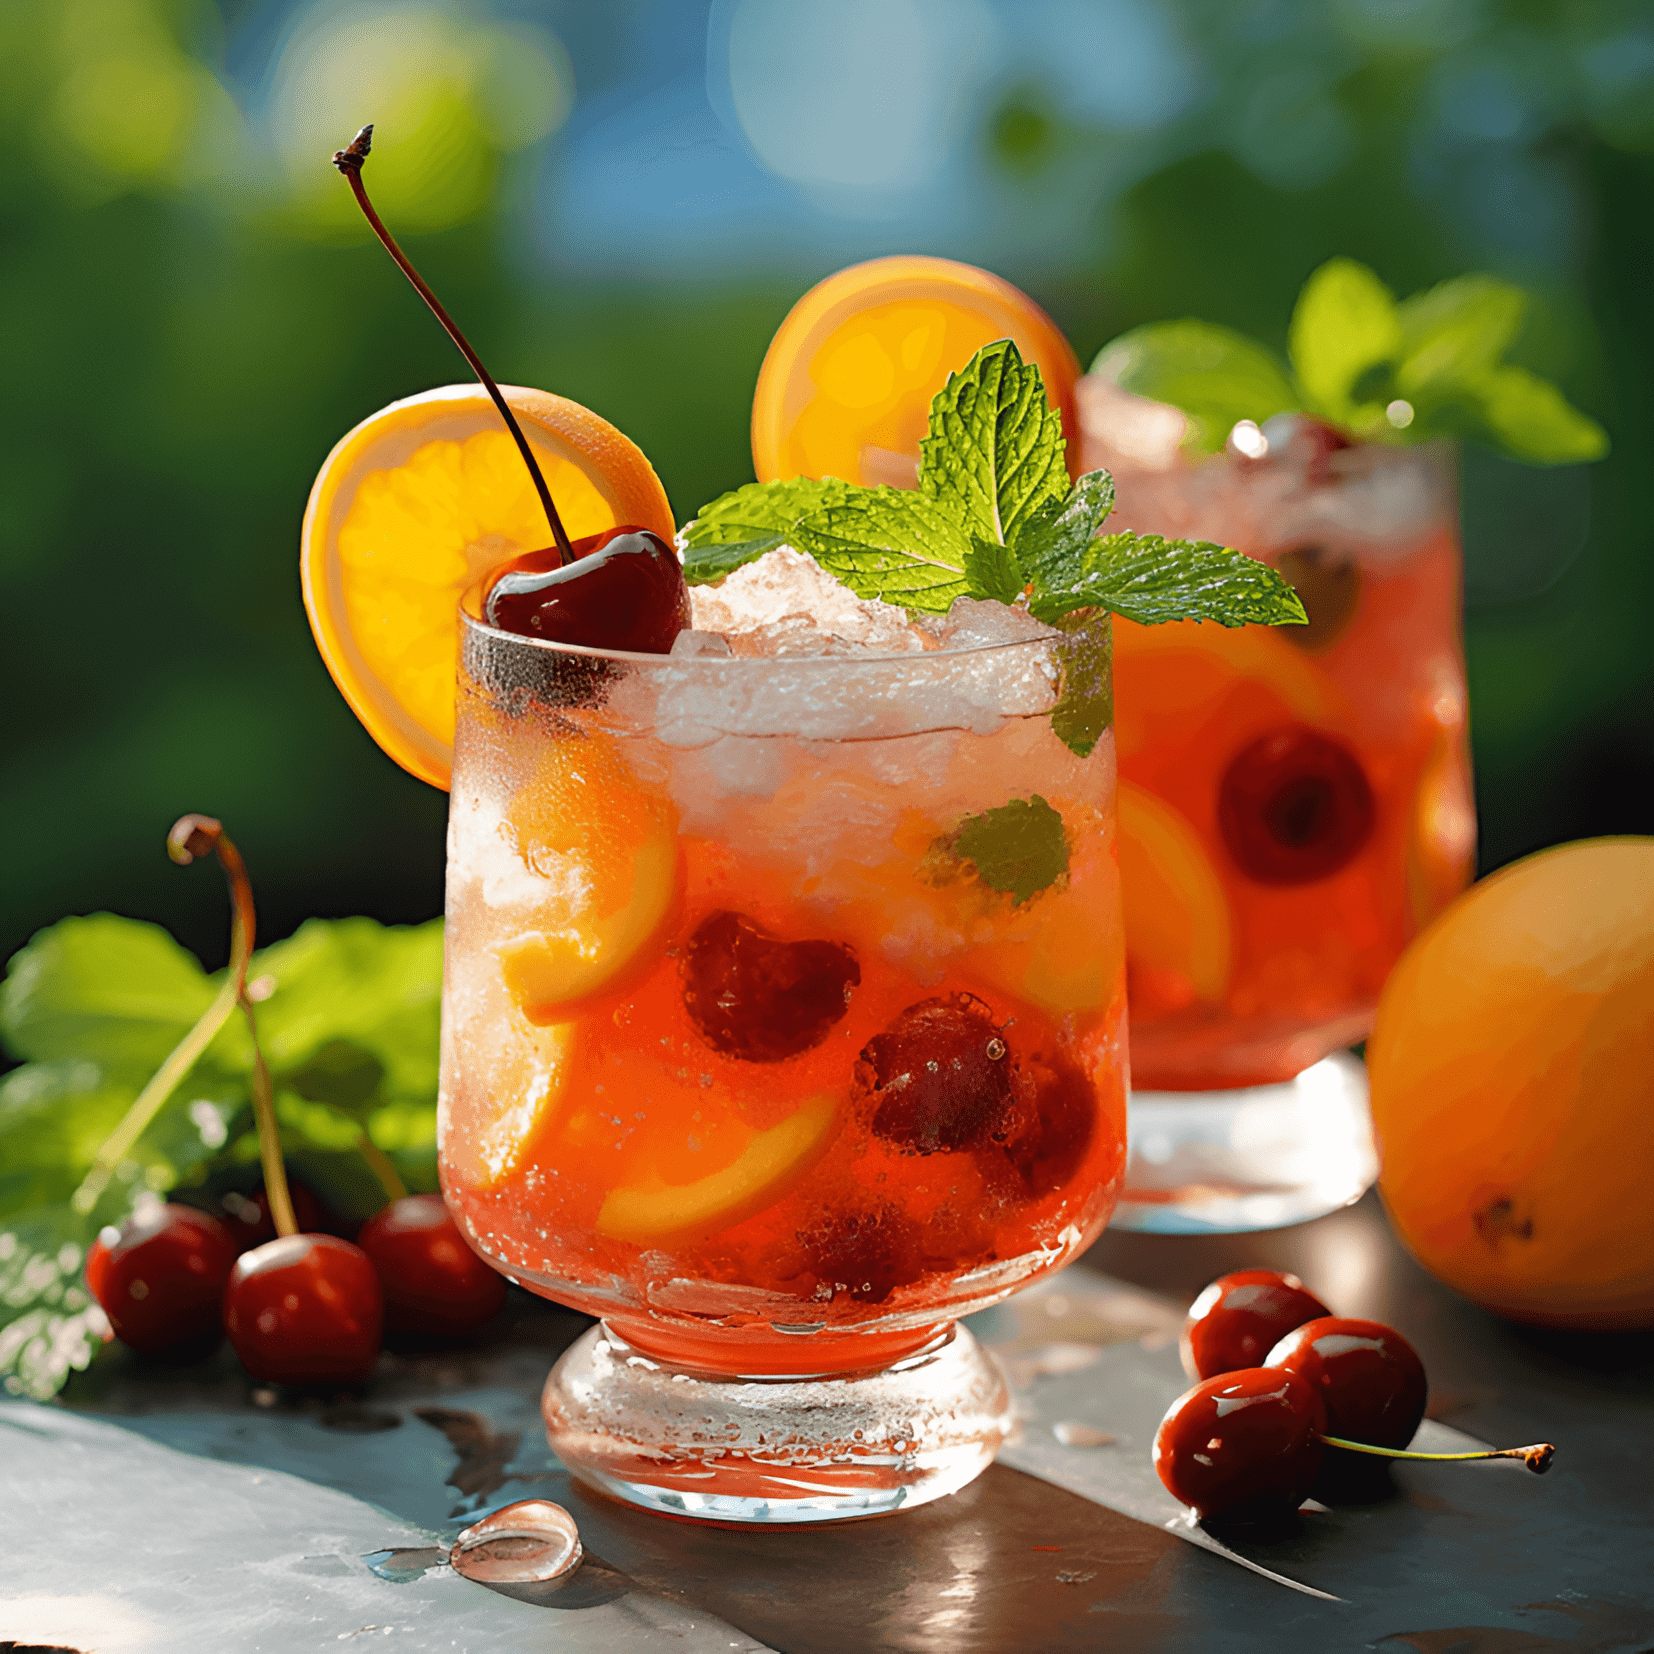 Rum Cobbler Cocktail Recipe - The Rum Cobbler has a well-balanced, fruity, and refreshing taste. It is slightly sweet, with a hint of tartness from the citrus fruits. The rum adds a warm, smooth, and slightly spicy flavor to the mix.